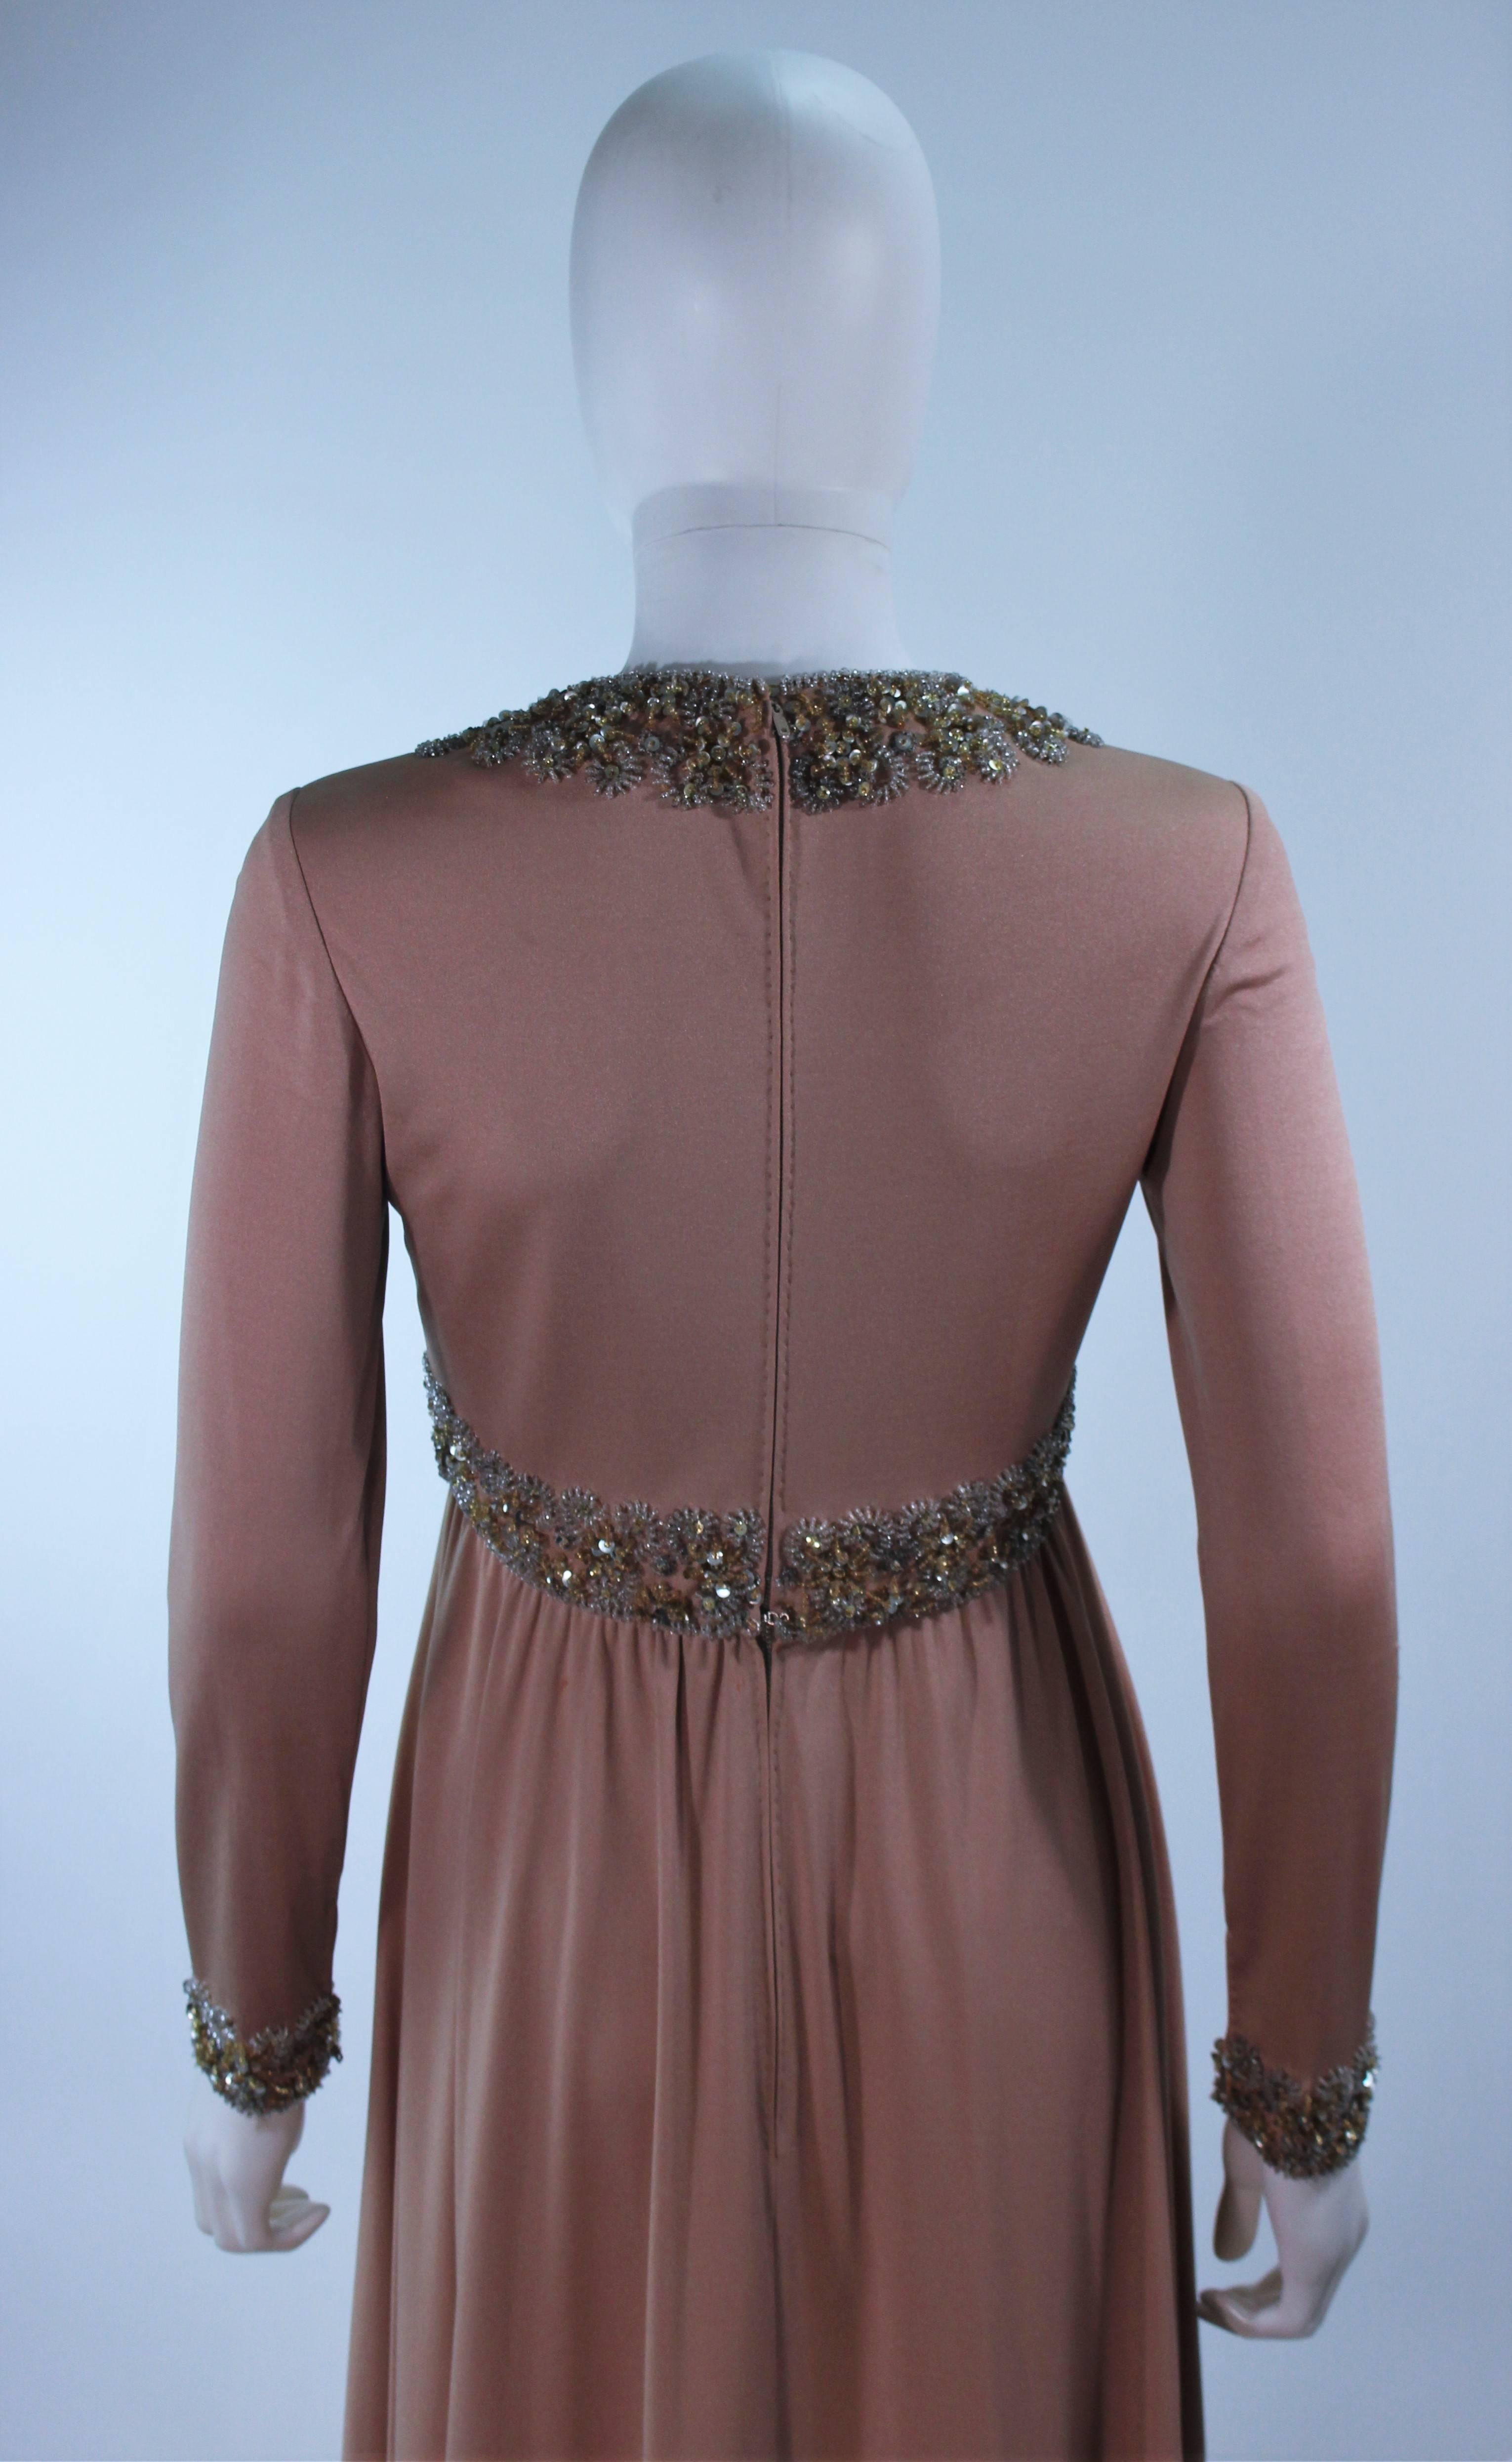 VICTORIA ROYAL Toffee Jersey Embellished Gown Size 6 8 For Sale 4